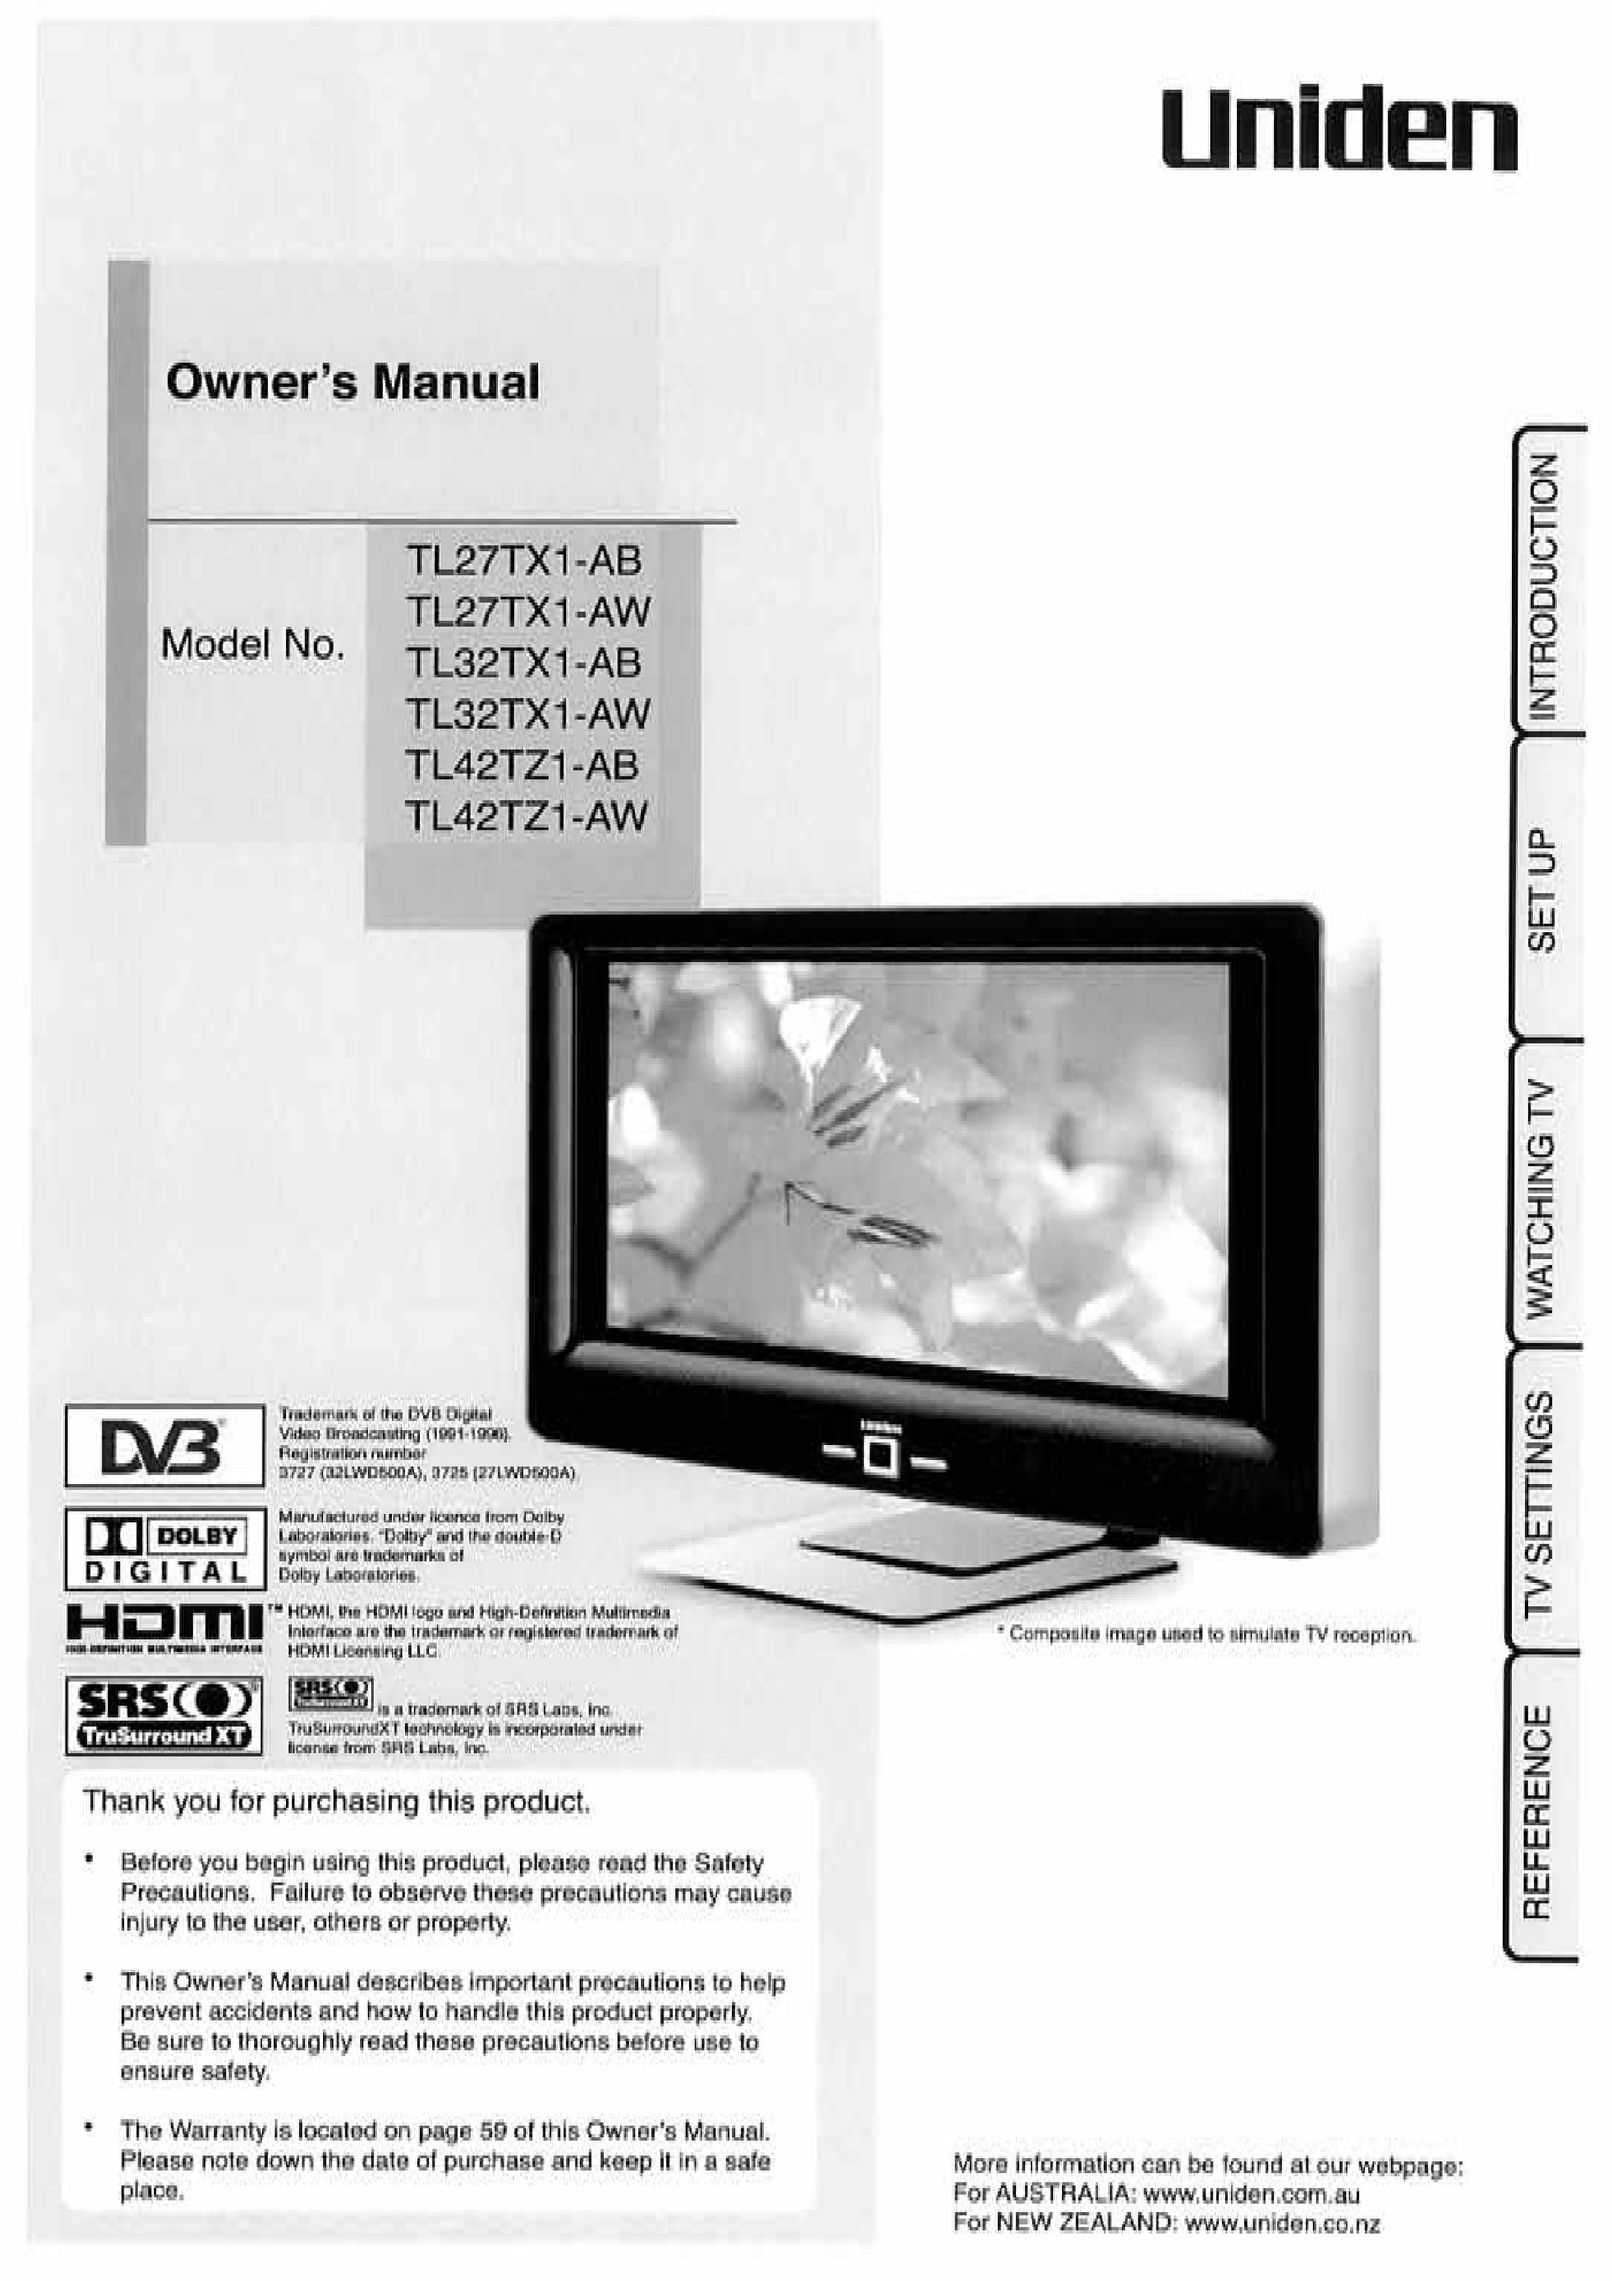 Uniden TL42TZ1-AW Flat Panel Television User Manual